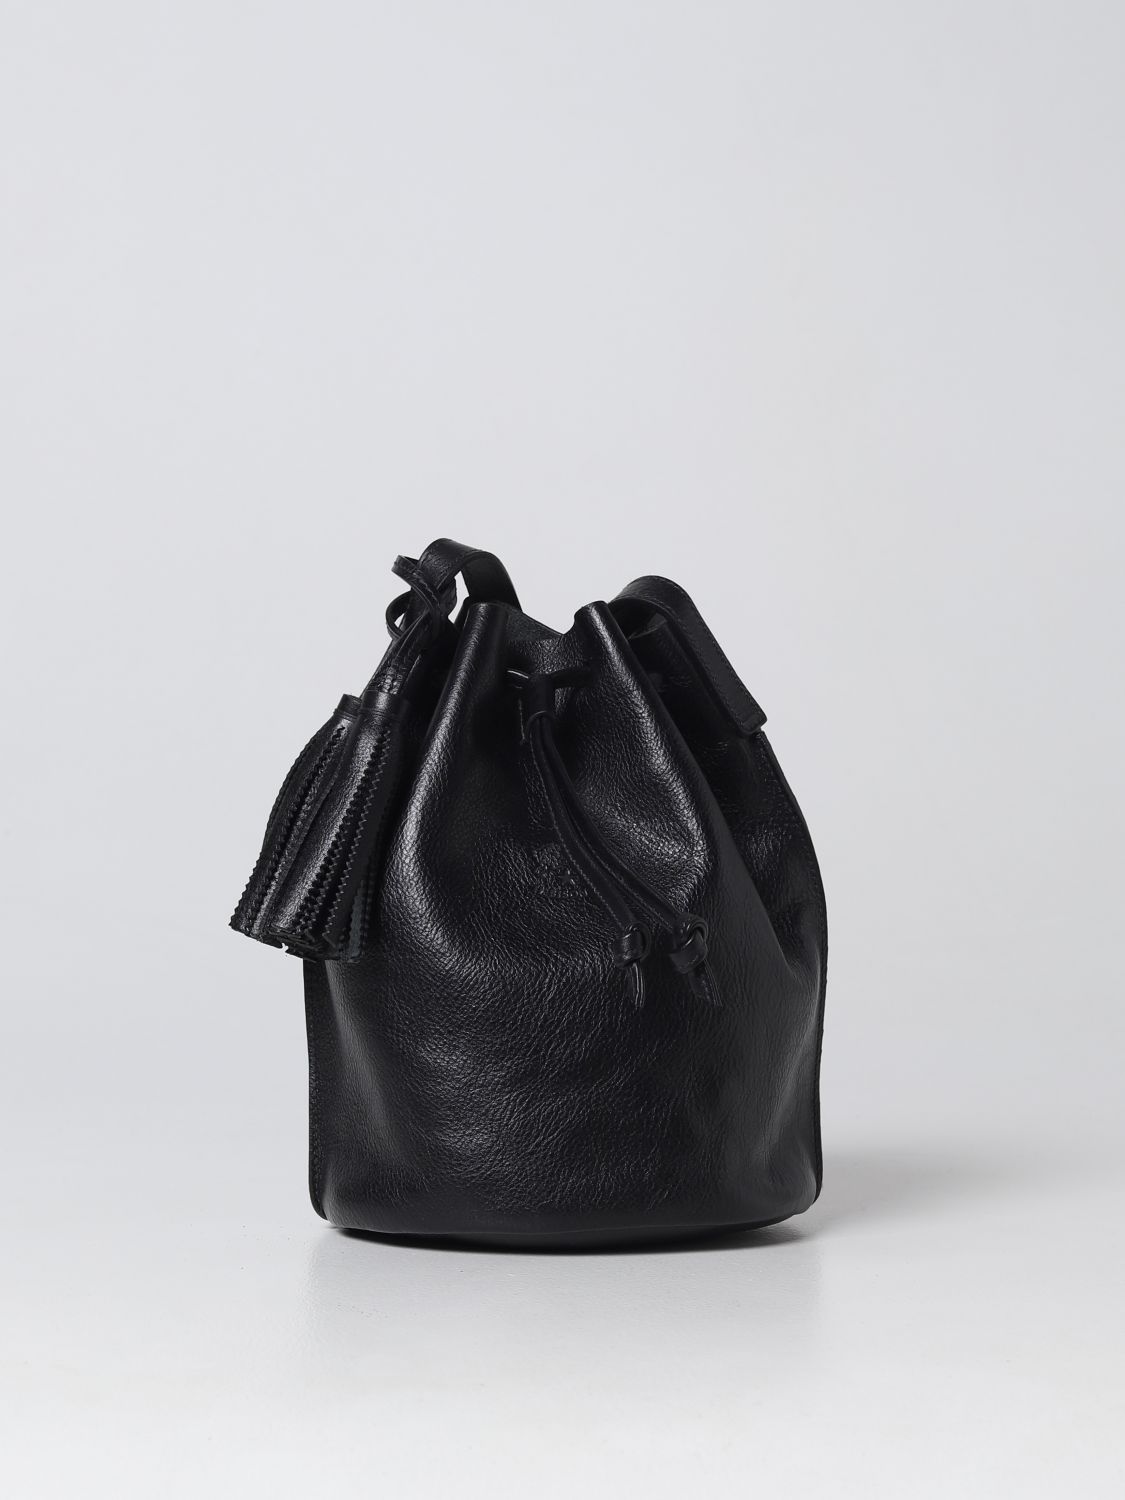 IL BISONTE BAG IN SOFT LEATHER,377511002